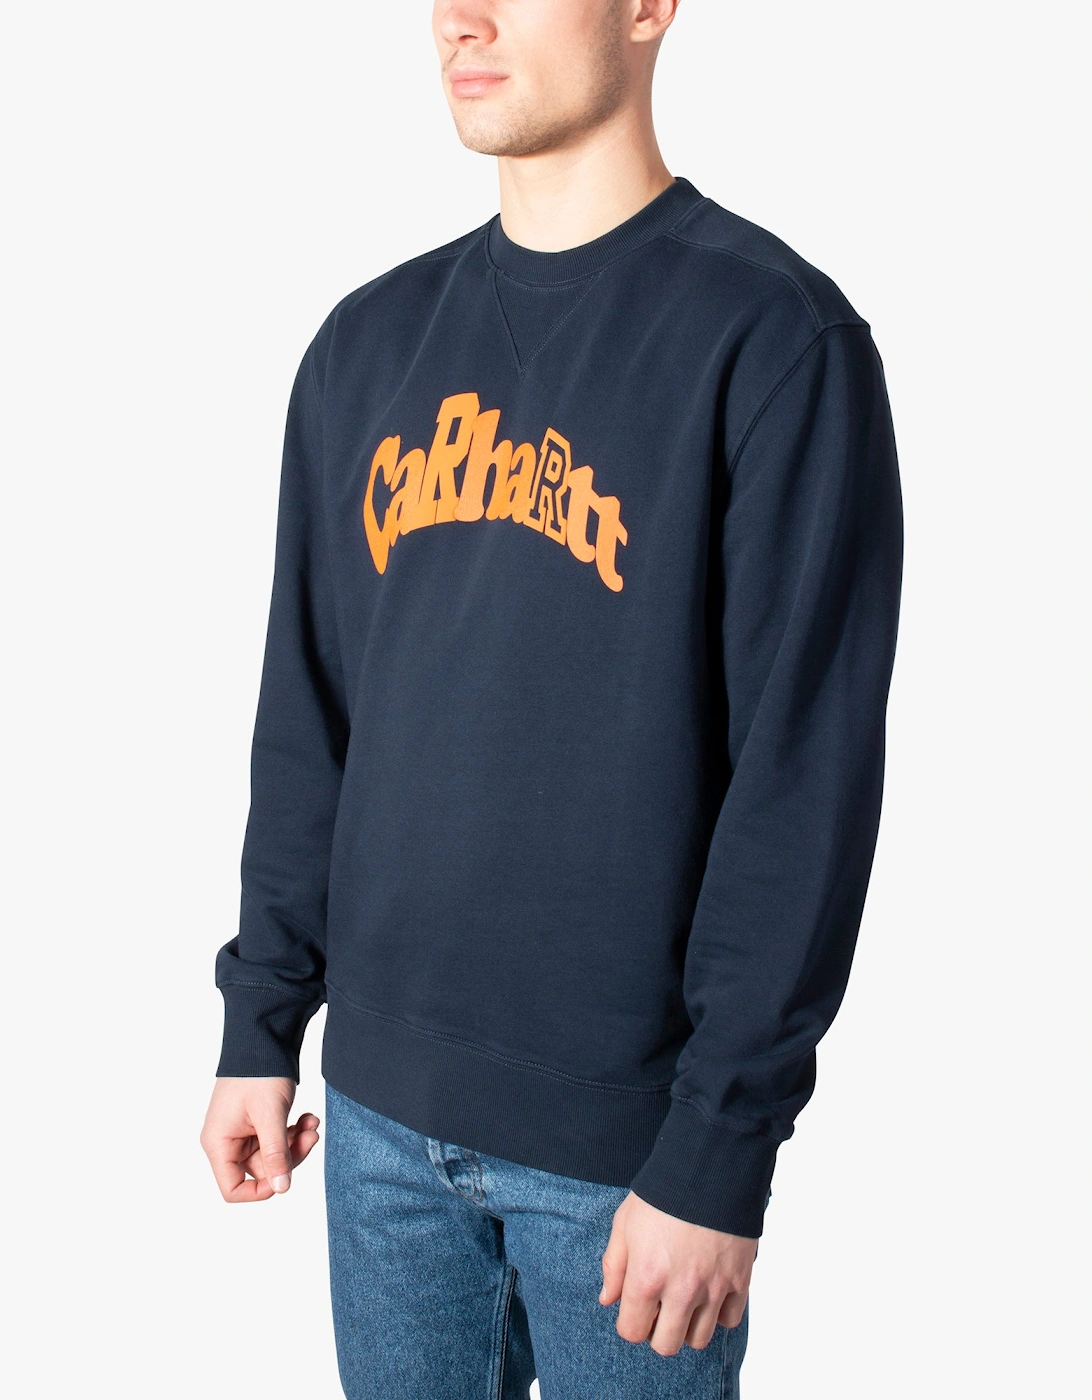 Relaxed fit Amherst Sweatshirt